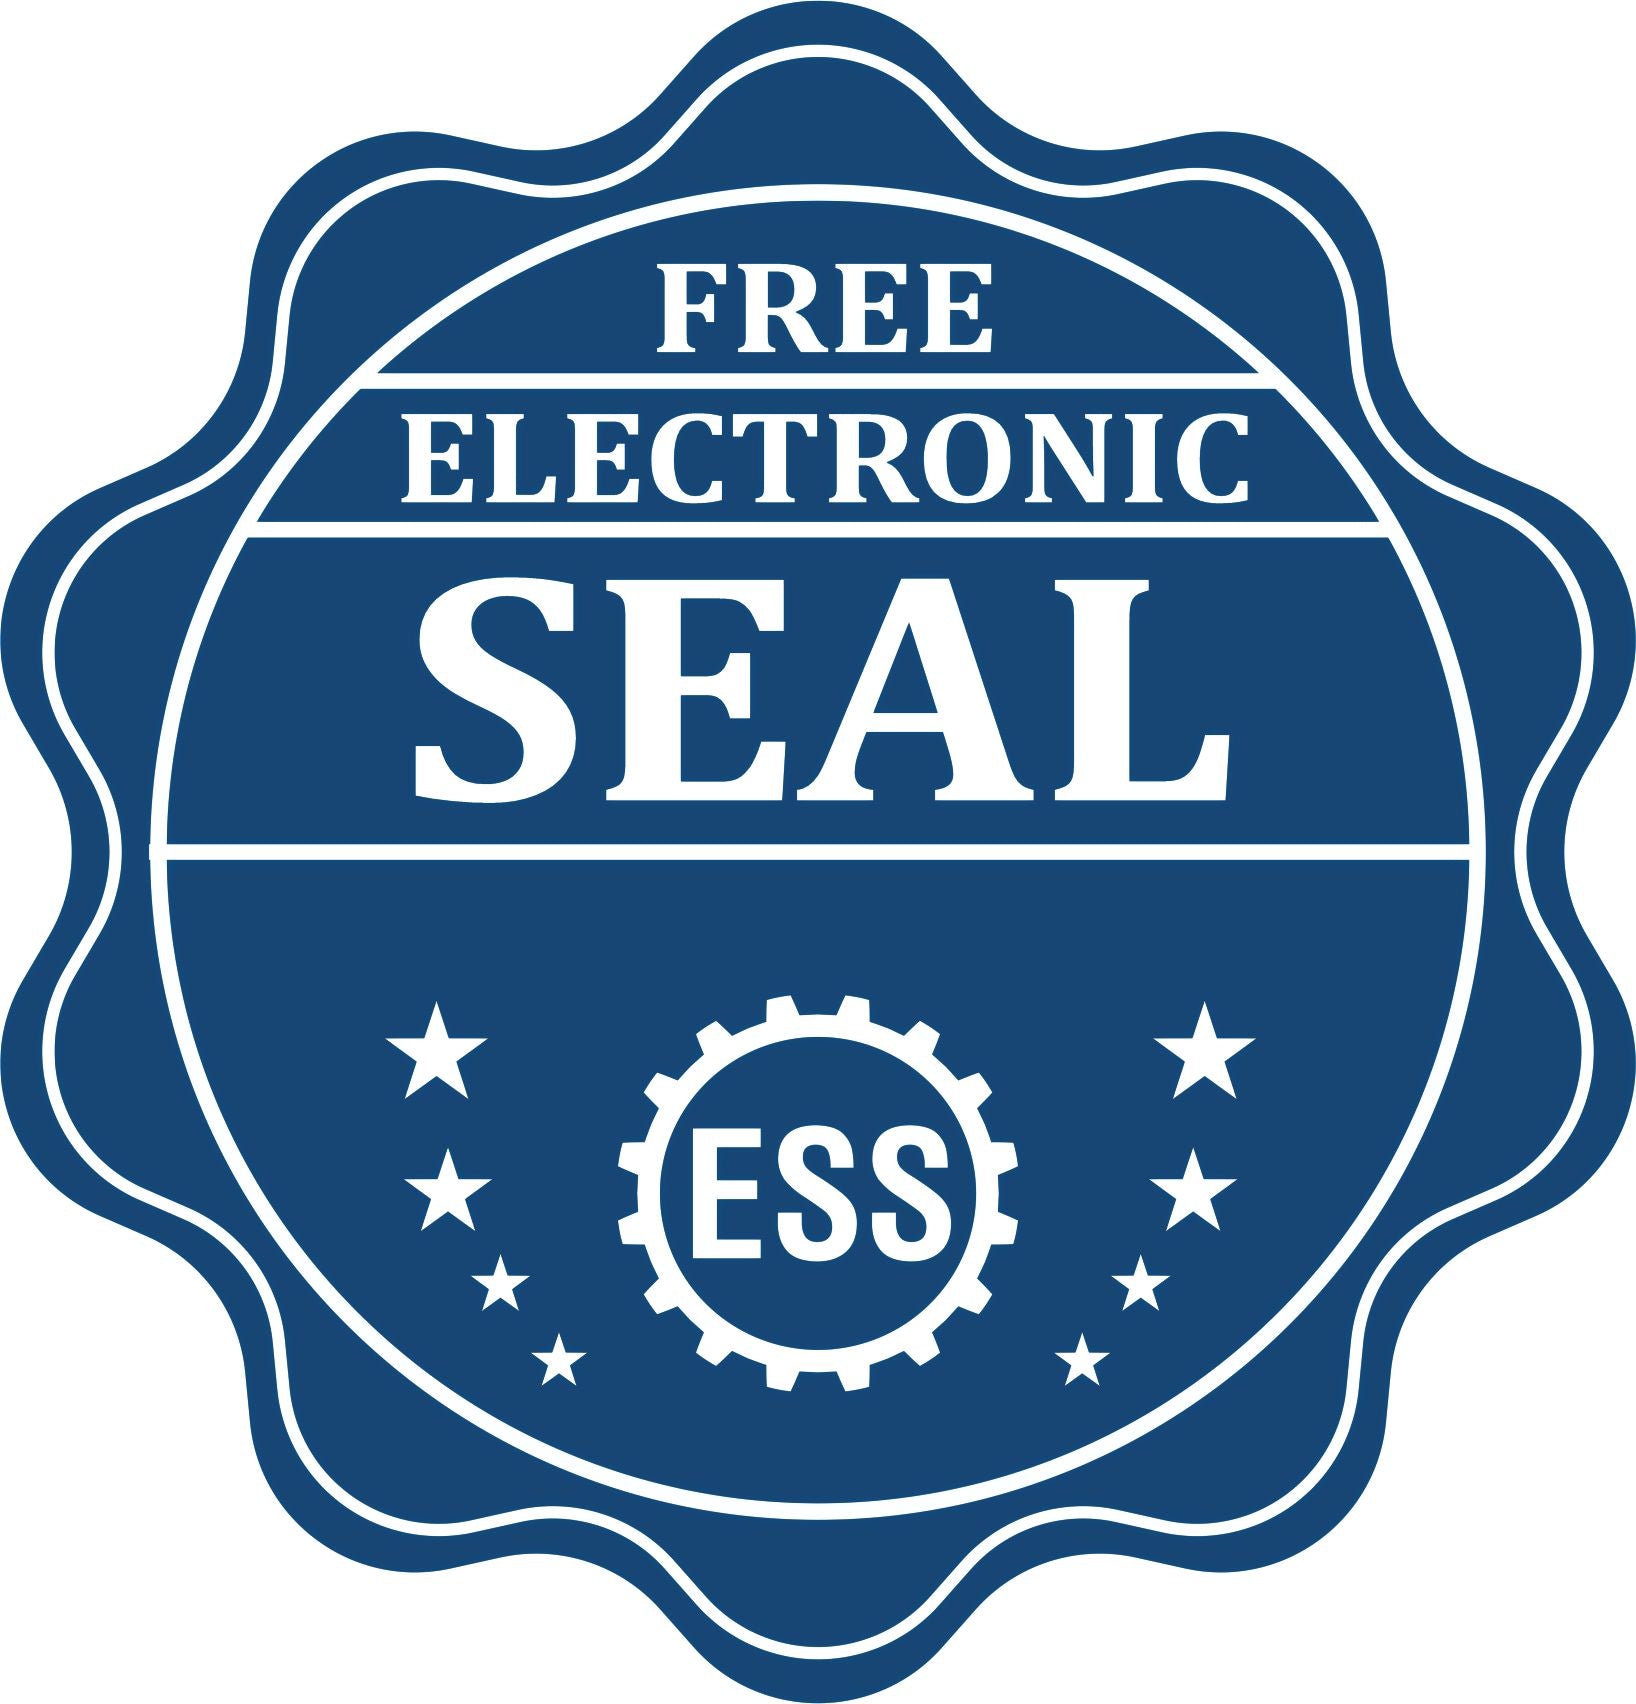 A badge showing a free electronic seal for the Slim Pre-Inked Delaware Landscape Architect Seal Stamp with stars and the ESS gear on the emblem.